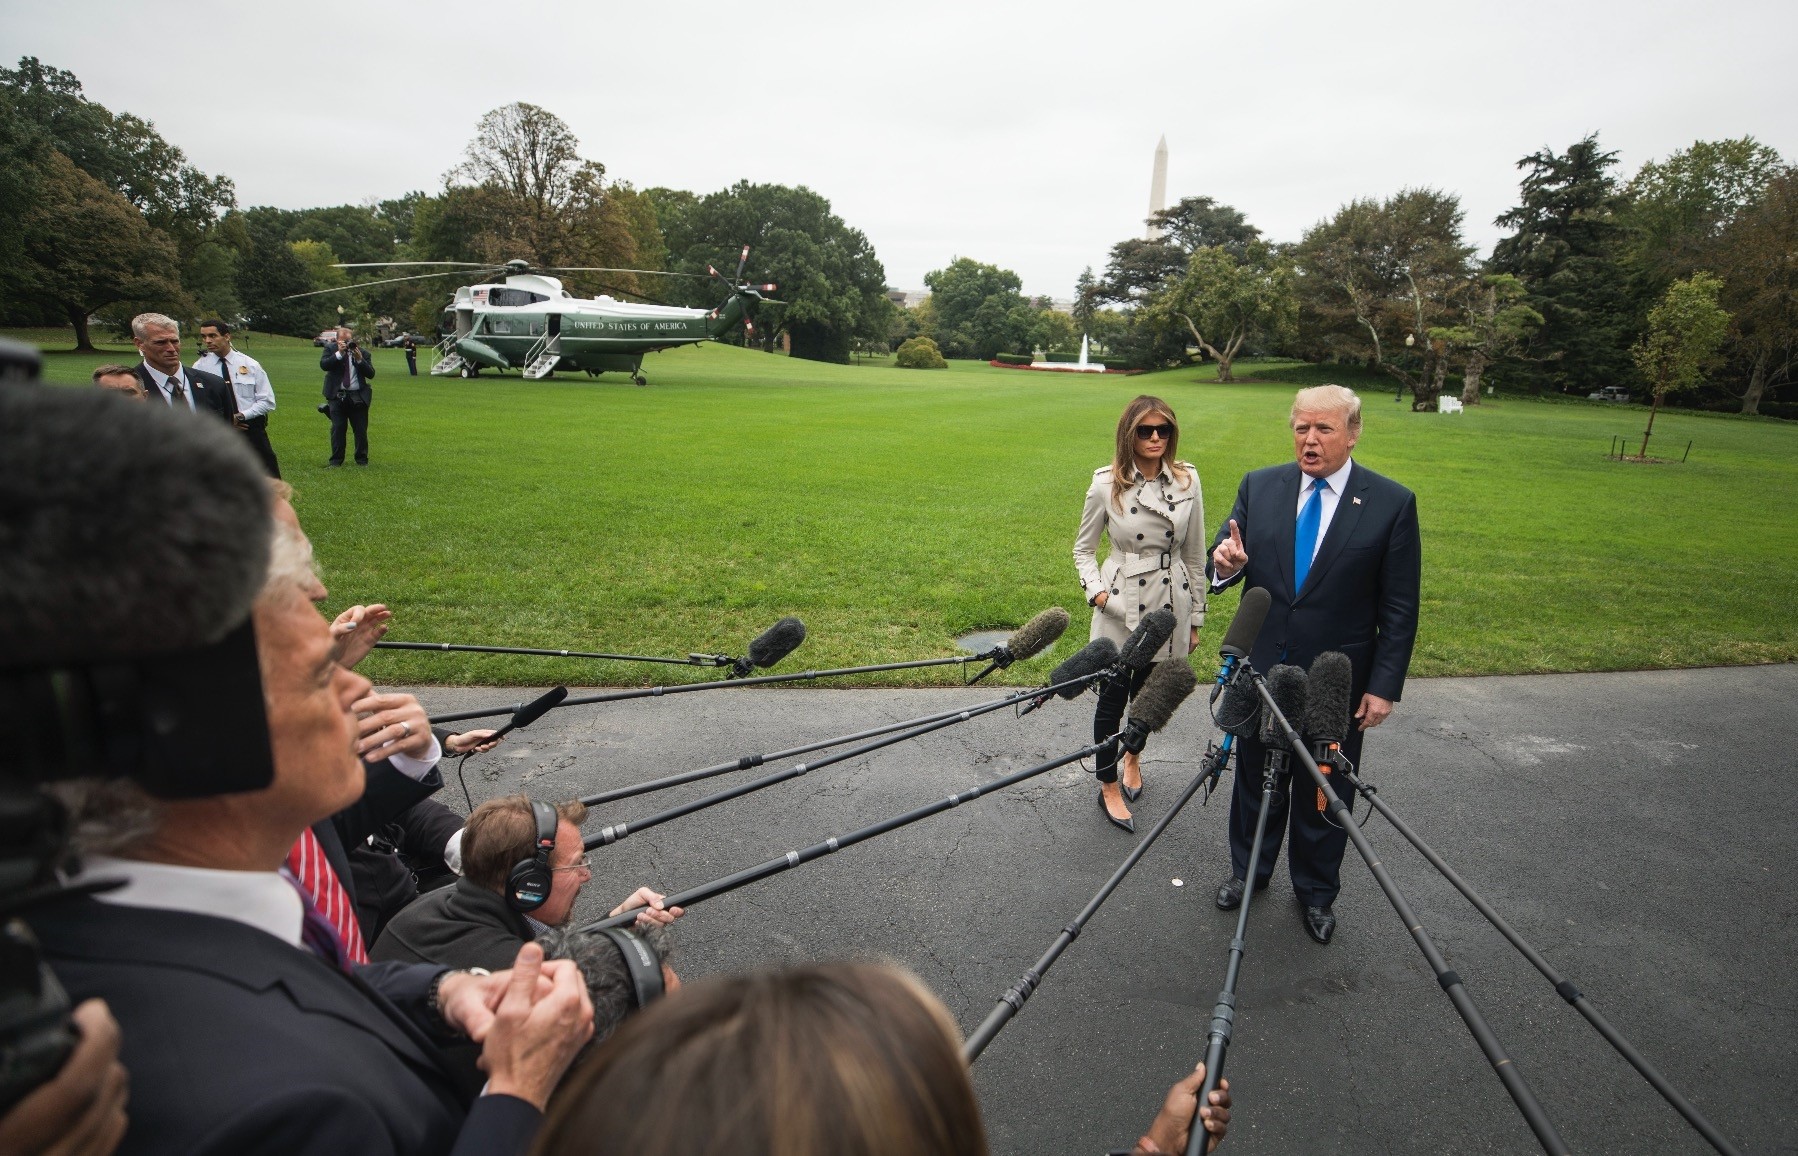 Trump answers reporter's questions about his decision to withdraw presidential certification of the Iran nuclear deal and about his moves to dismantle the Obamacare